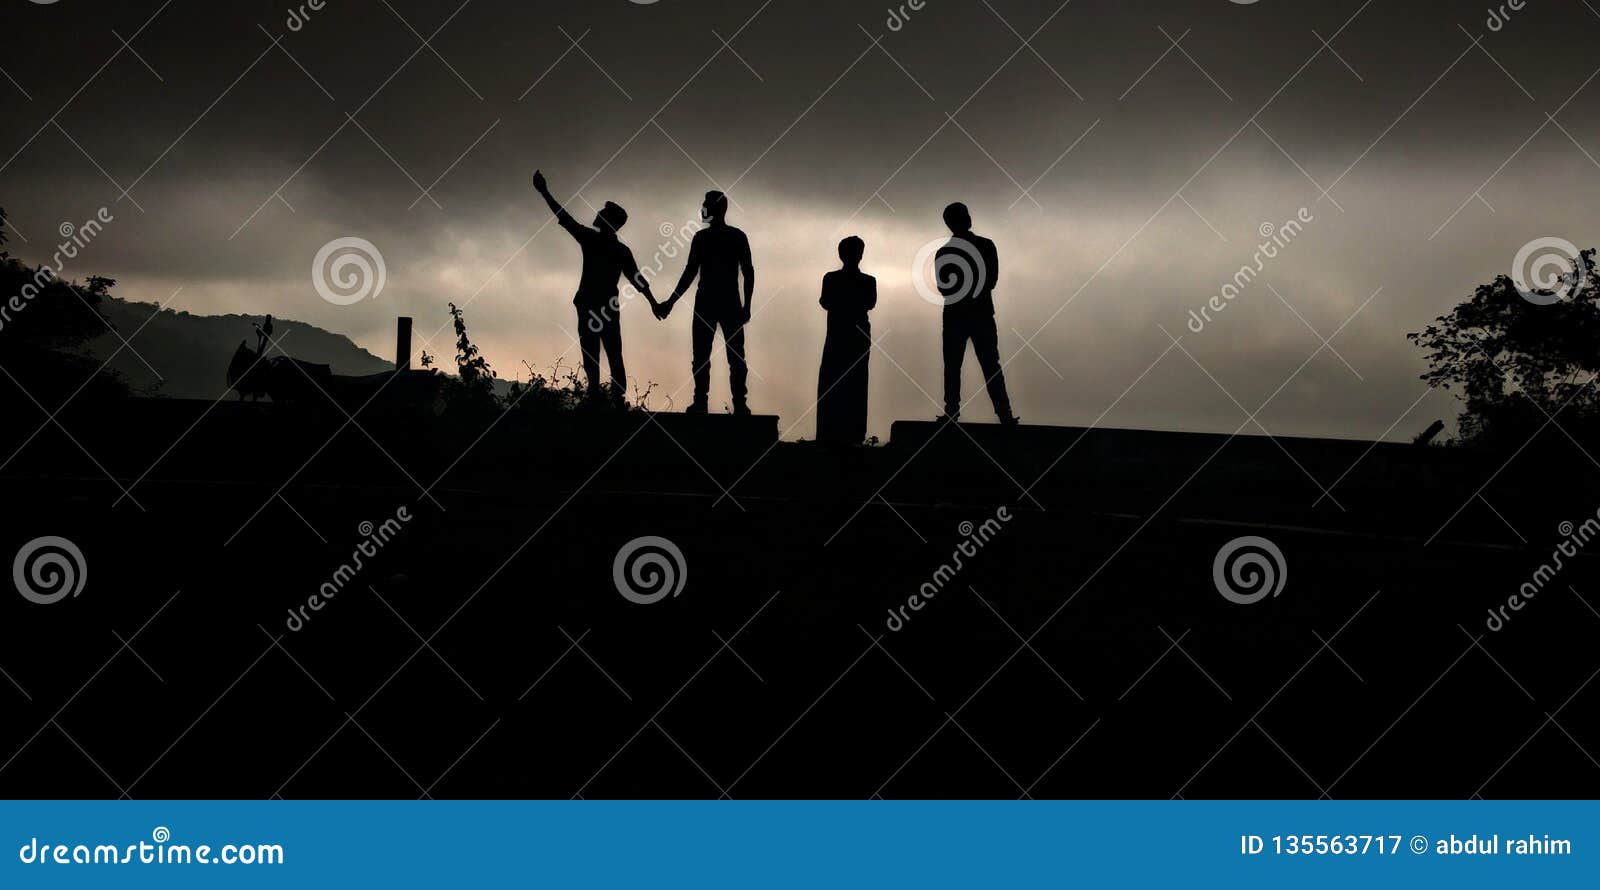 Friendship Goals of Shadow Photography Stock Image - Image of ...